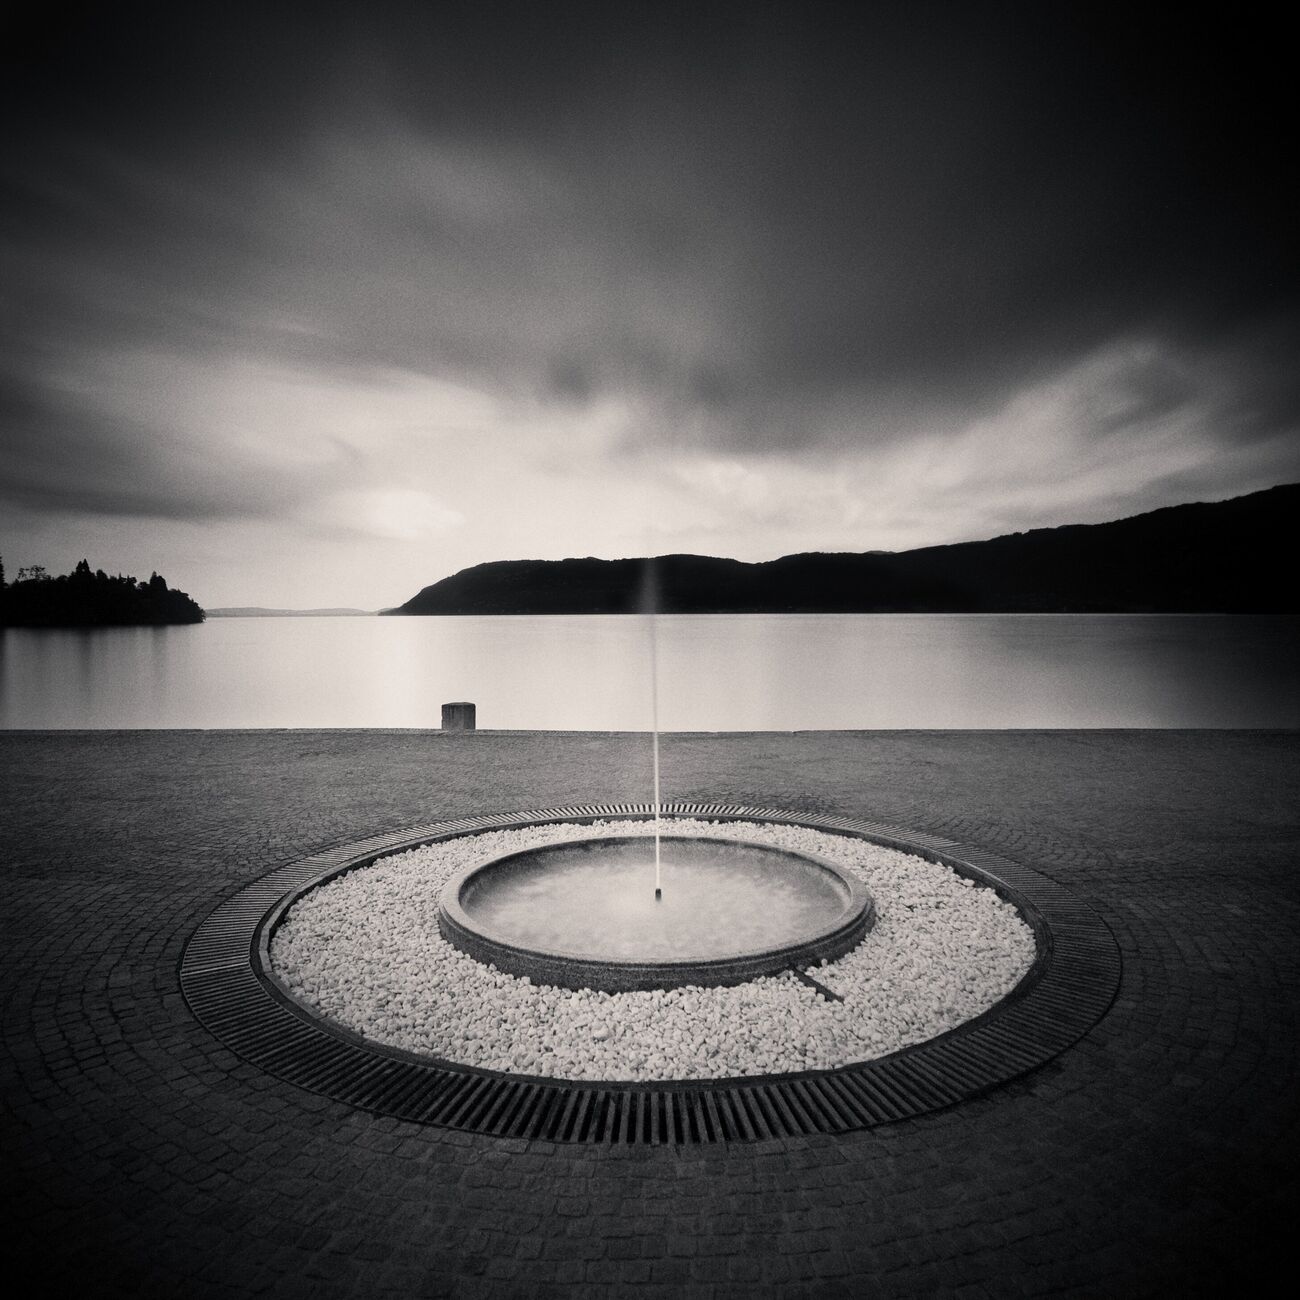 Fountain, Maggiore Lake, Italy. August 2014. Ref-1294 - Denis Olivier Photography